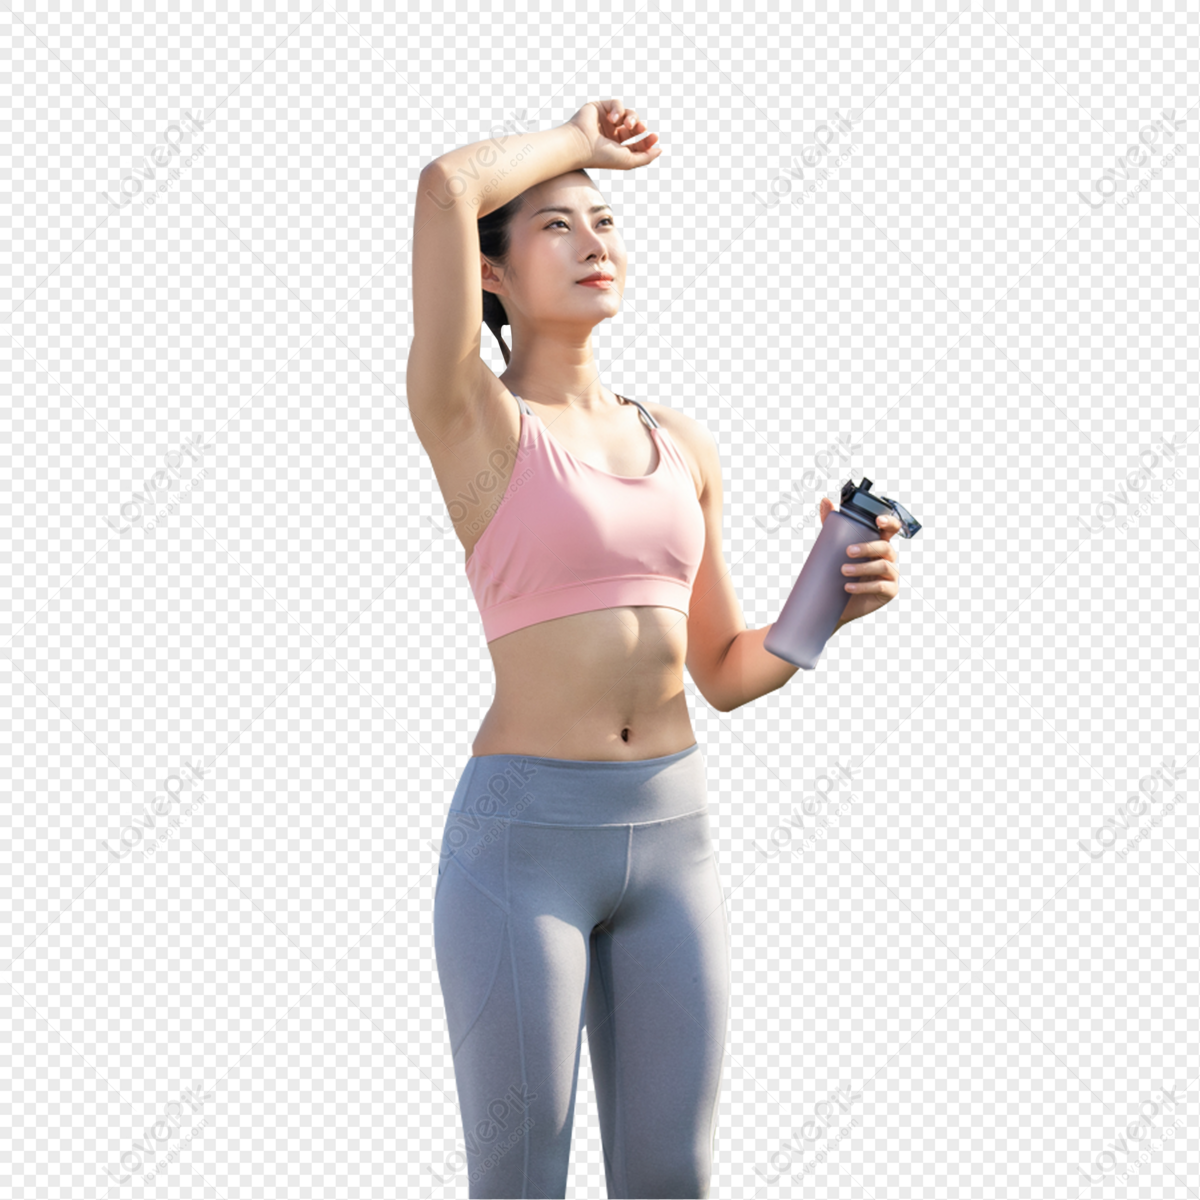 Female Fitness PNG Transparent Images Free Download